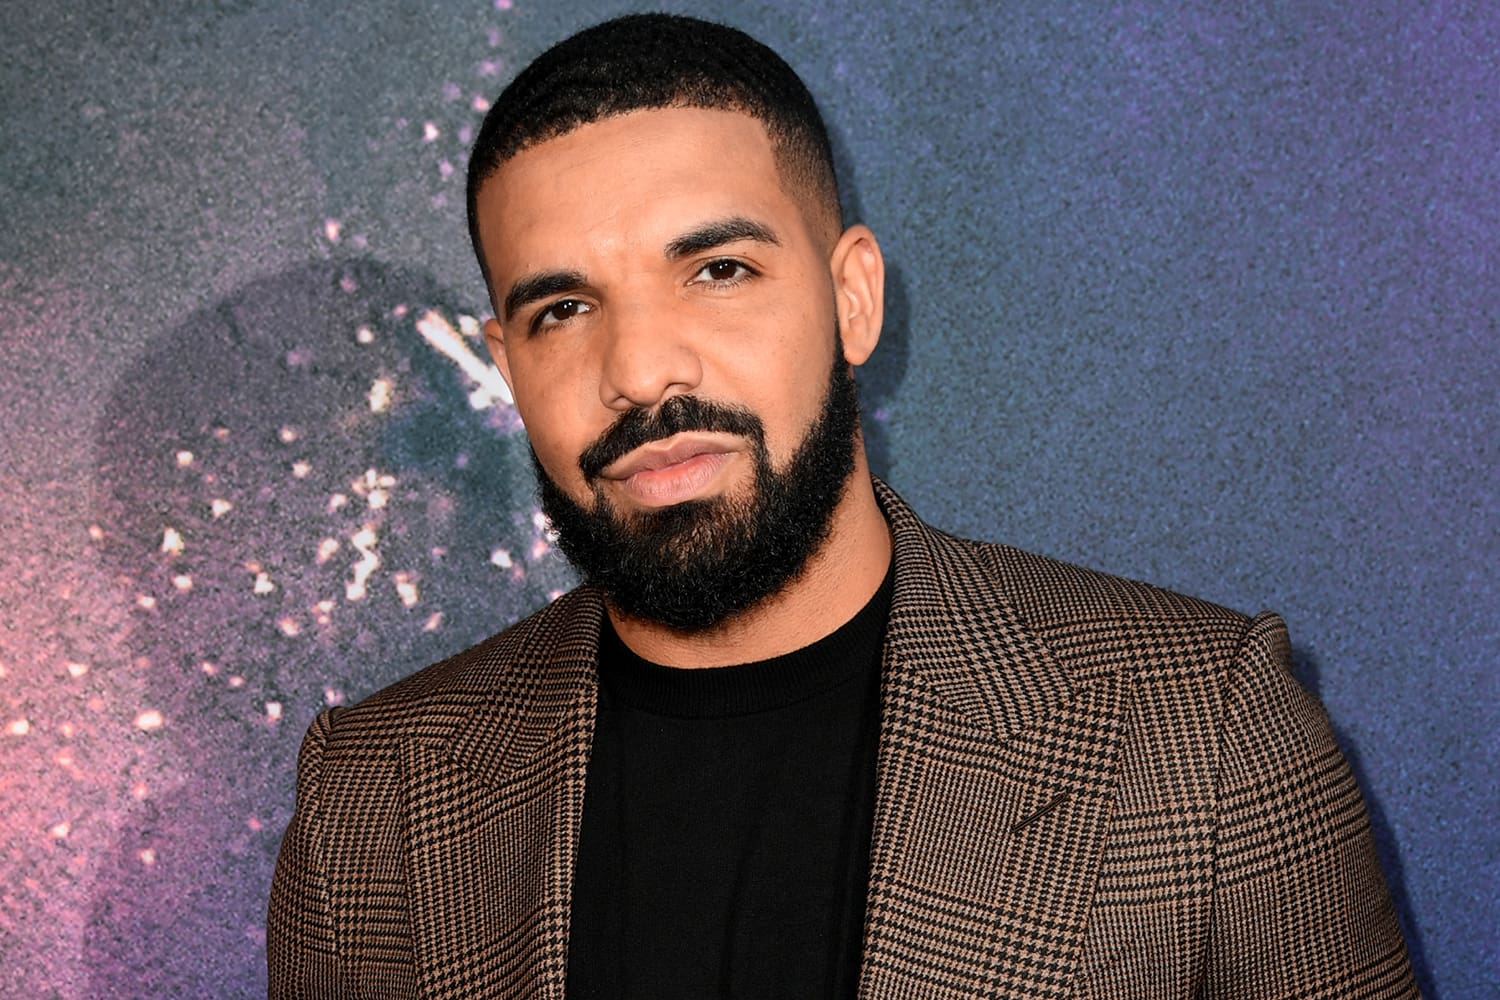 Drake Brings Out Keshia Chanté At OVO Festival And Tells Audience She Was His First Girlfriend